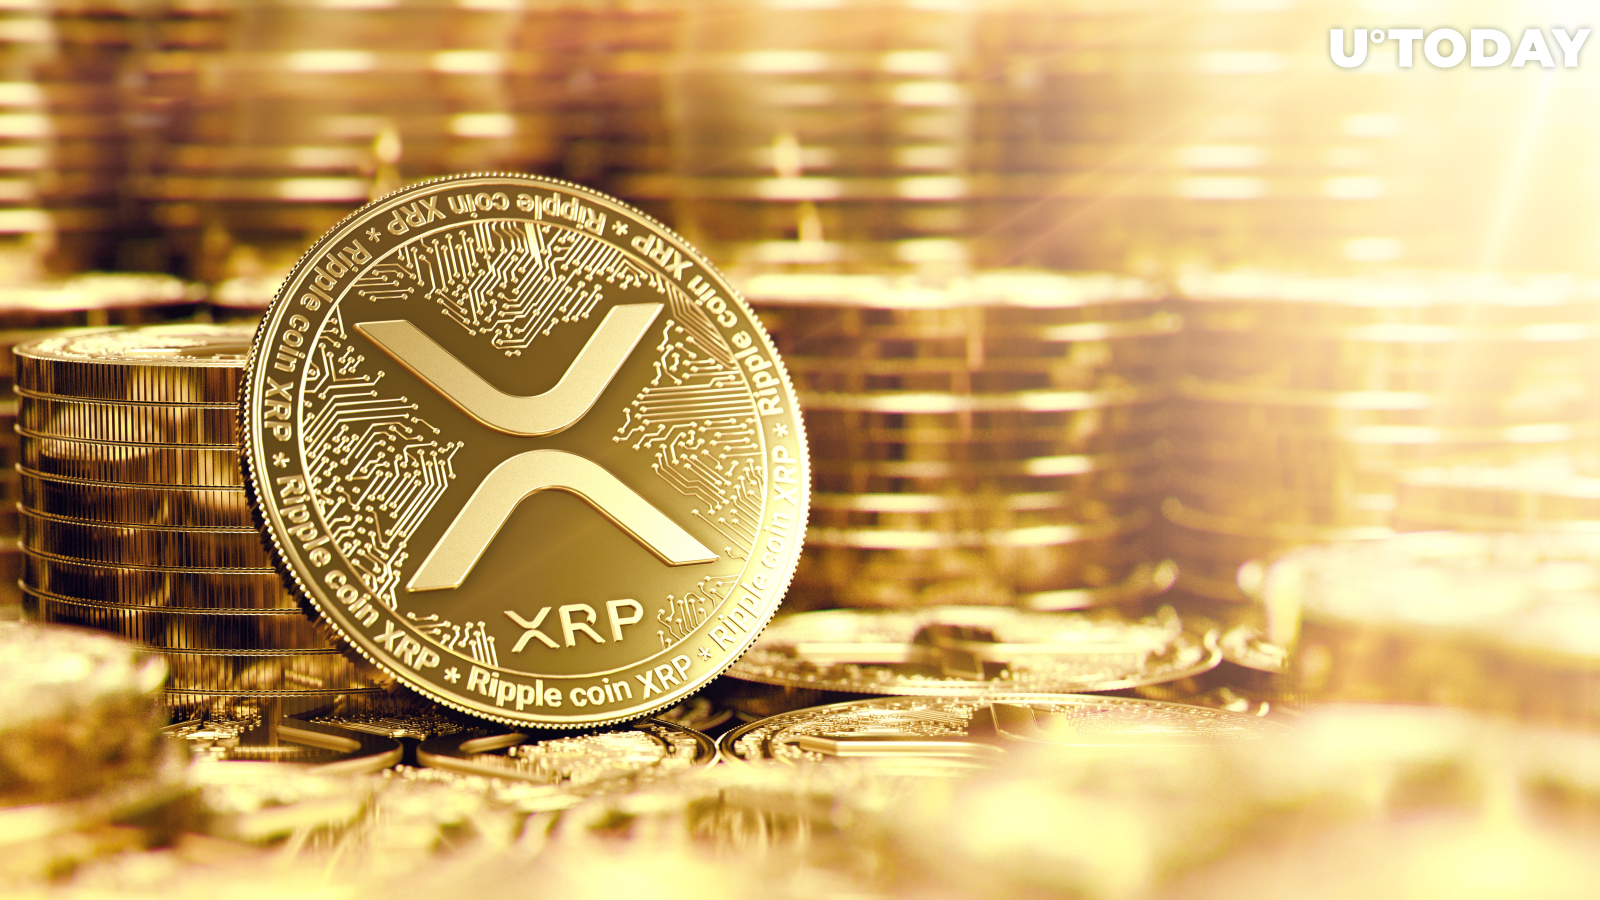 XRP Surges 10 Percent on String of Bullish News While Other Top Coins Remain in the Red